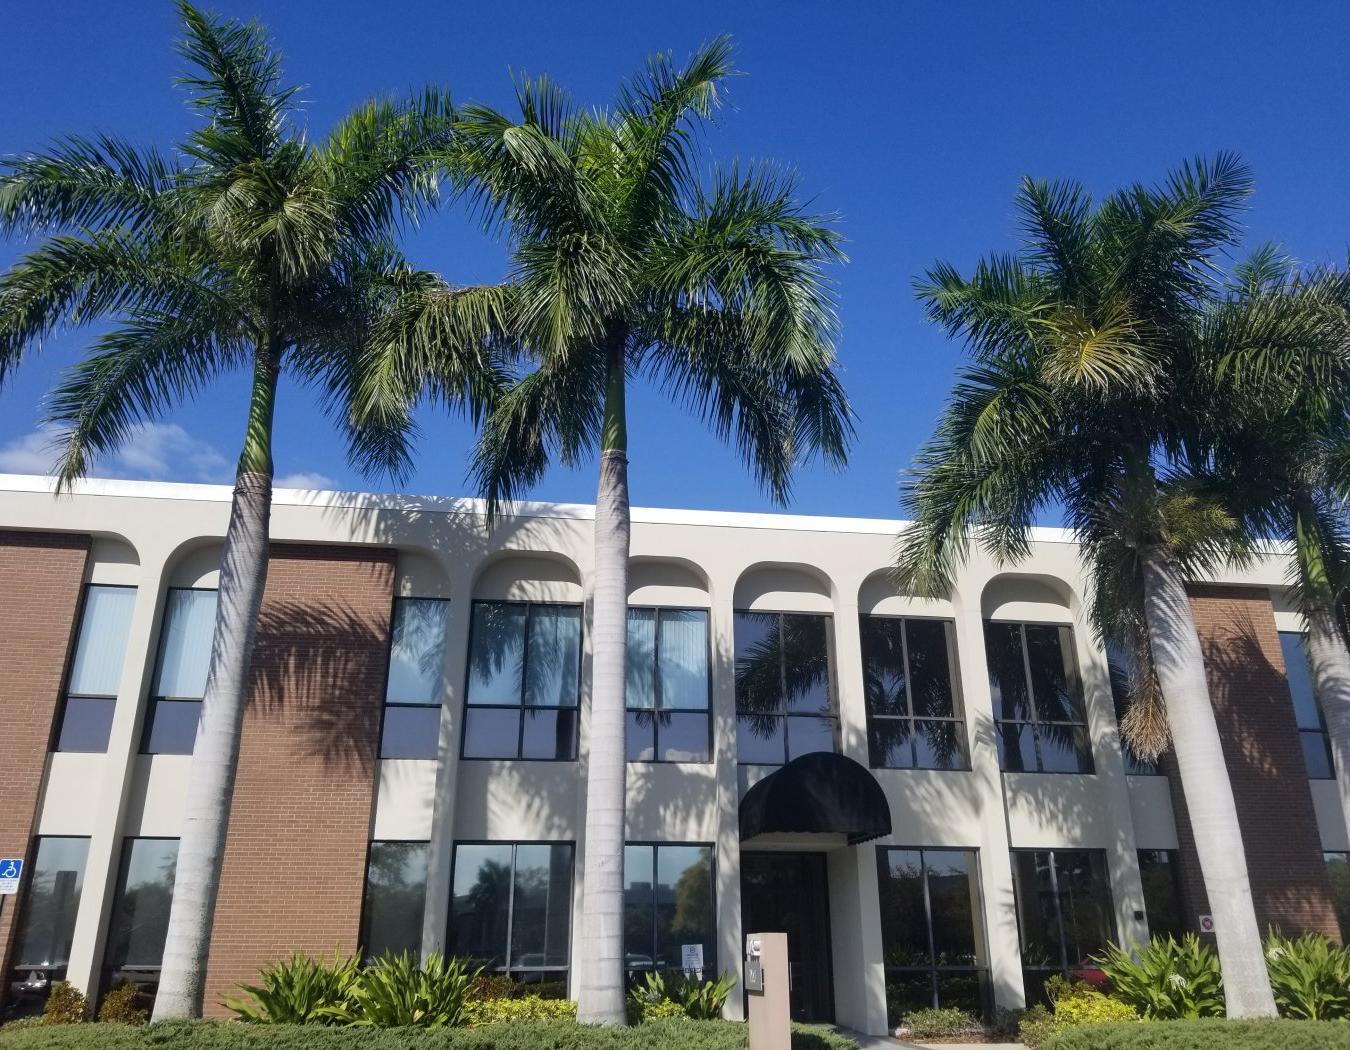 Exterior of a building on the St. Petersburg, Florida campus of Utica University.